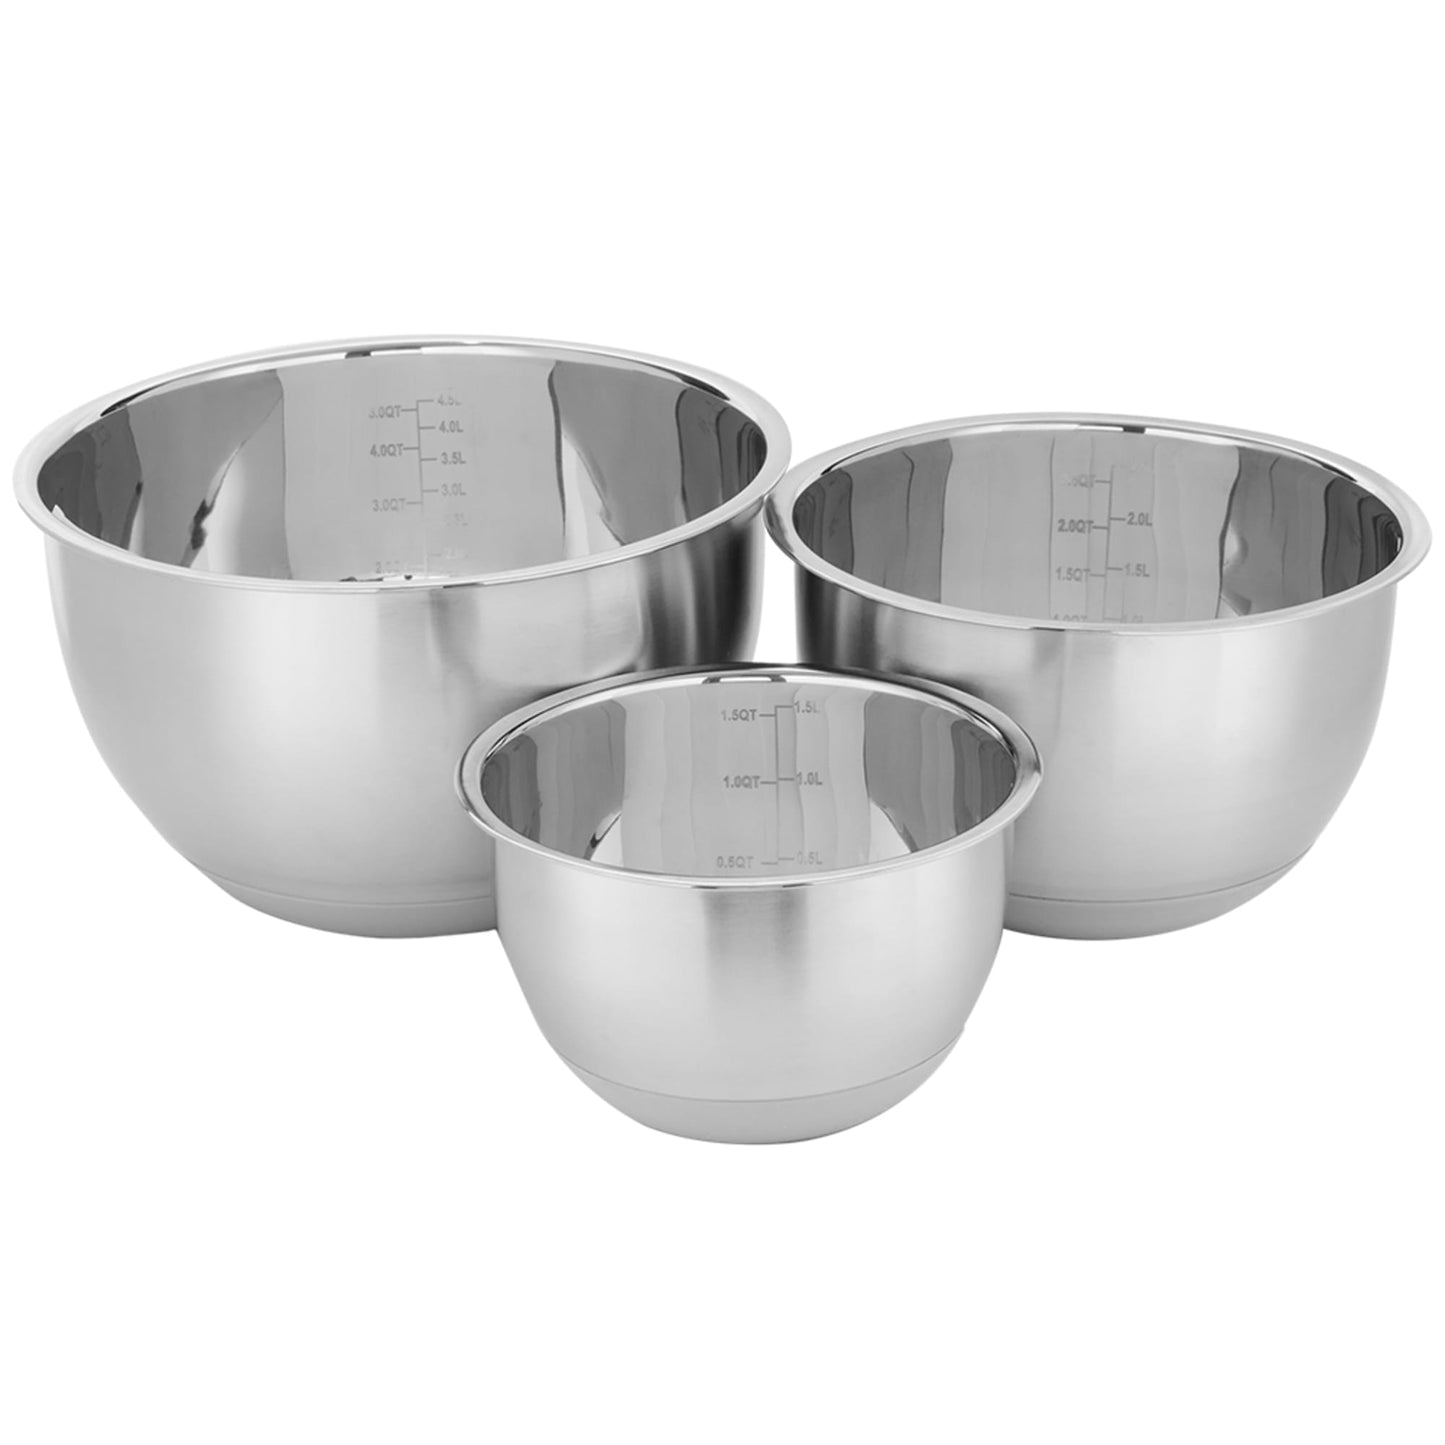 Mixing Bowls Metal Stainless Steel Bowls Set (3/5 Pack) Kitchen Nesting  Bowls